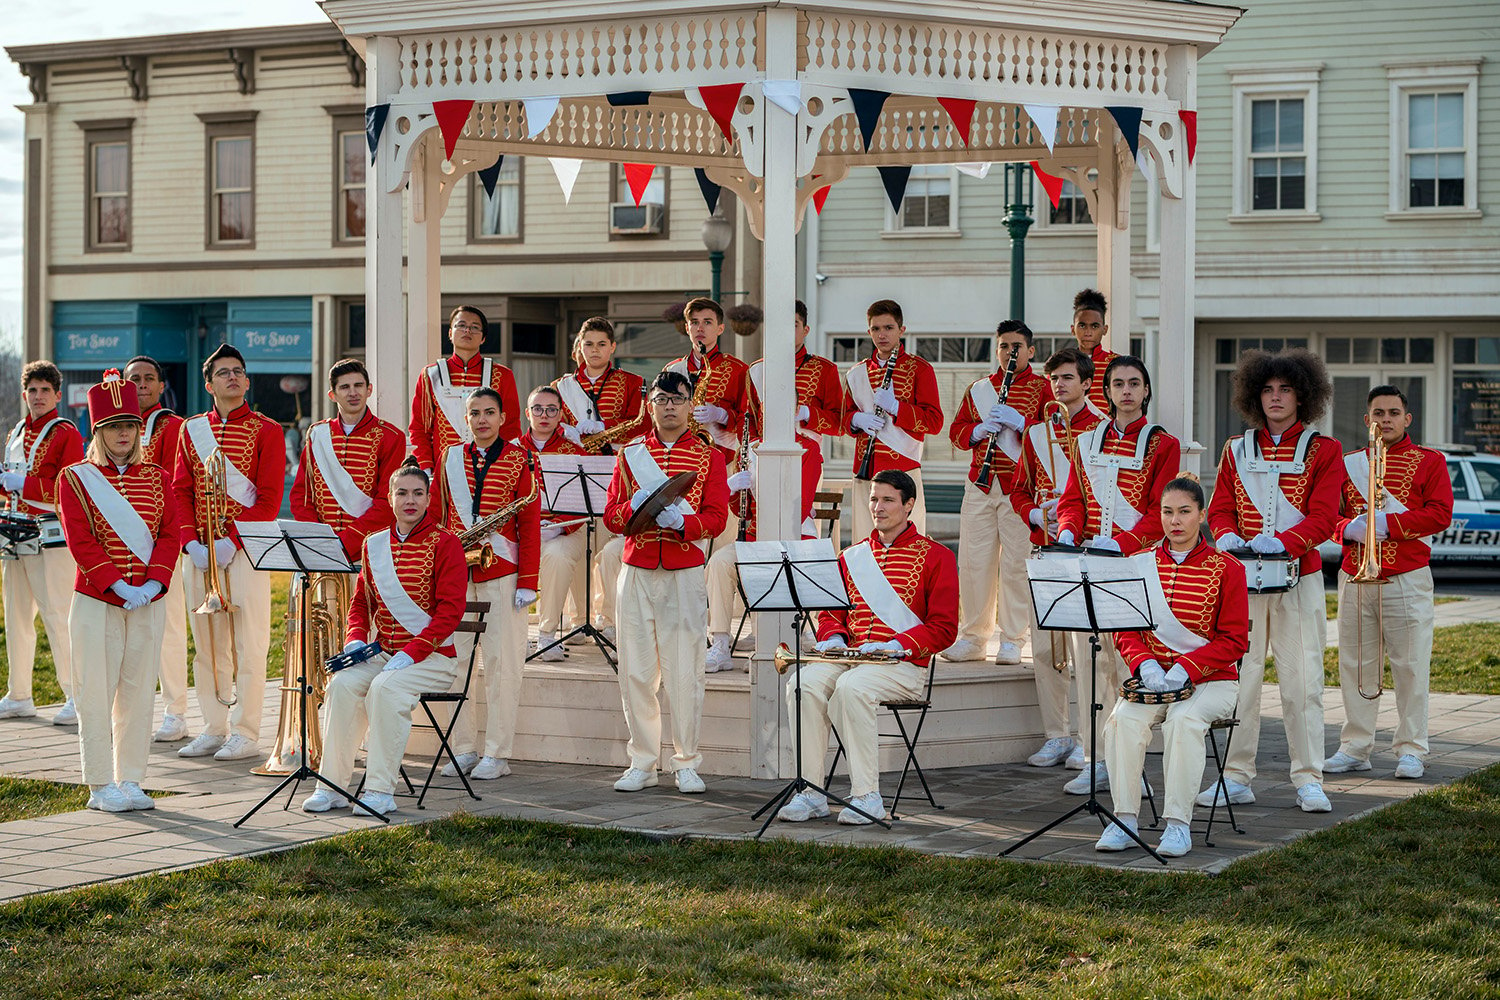 A marching band in red uniforms performs in the town square in Wednesday, which many Gilmore Girls fans think looks like Stars Hollow.